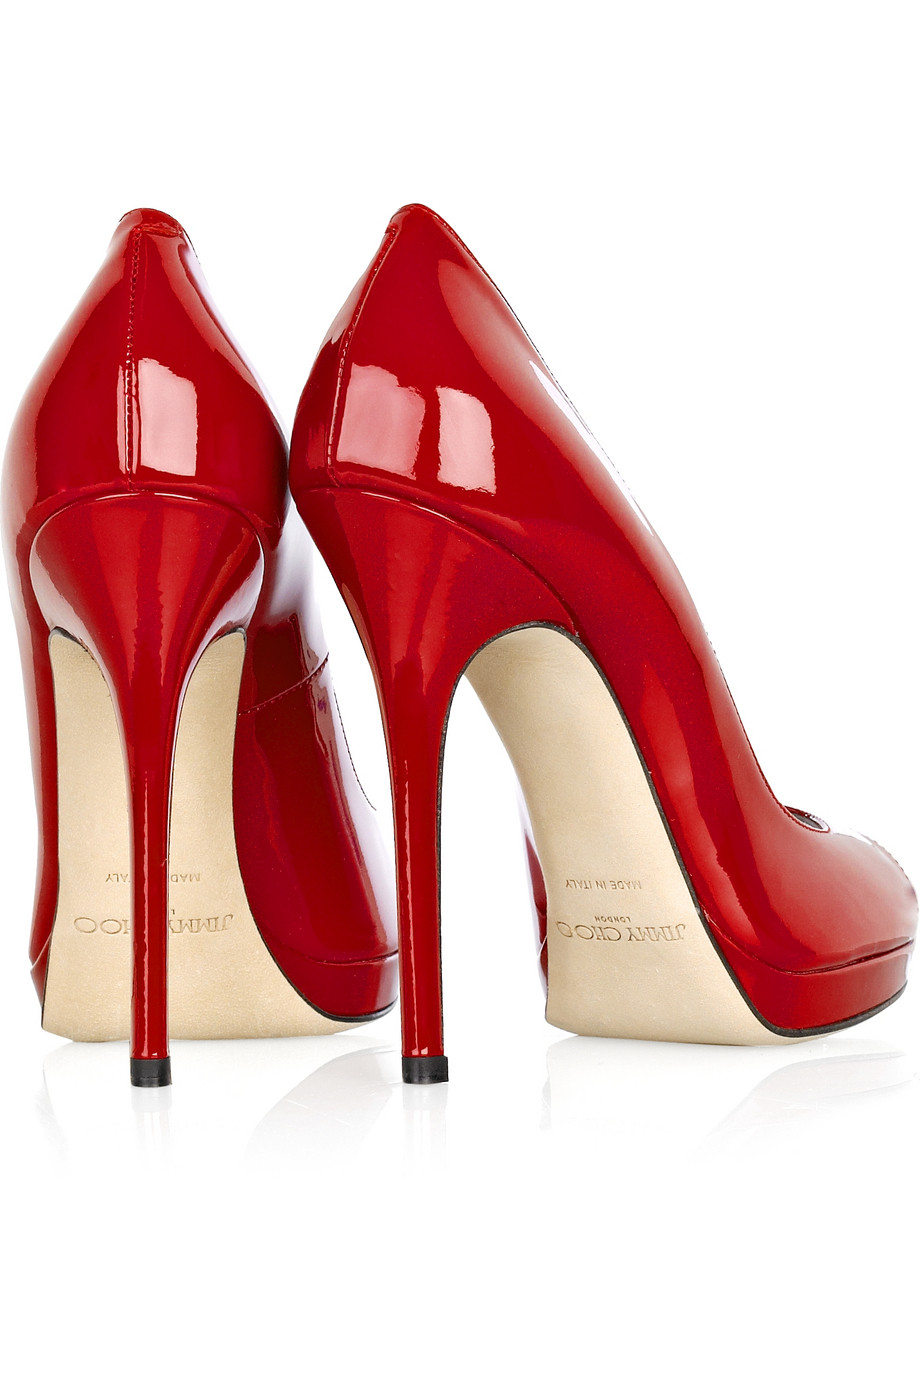 Jimmy Choo Quiet Patent-leather Pumps in Crimson (Red) - Lyst